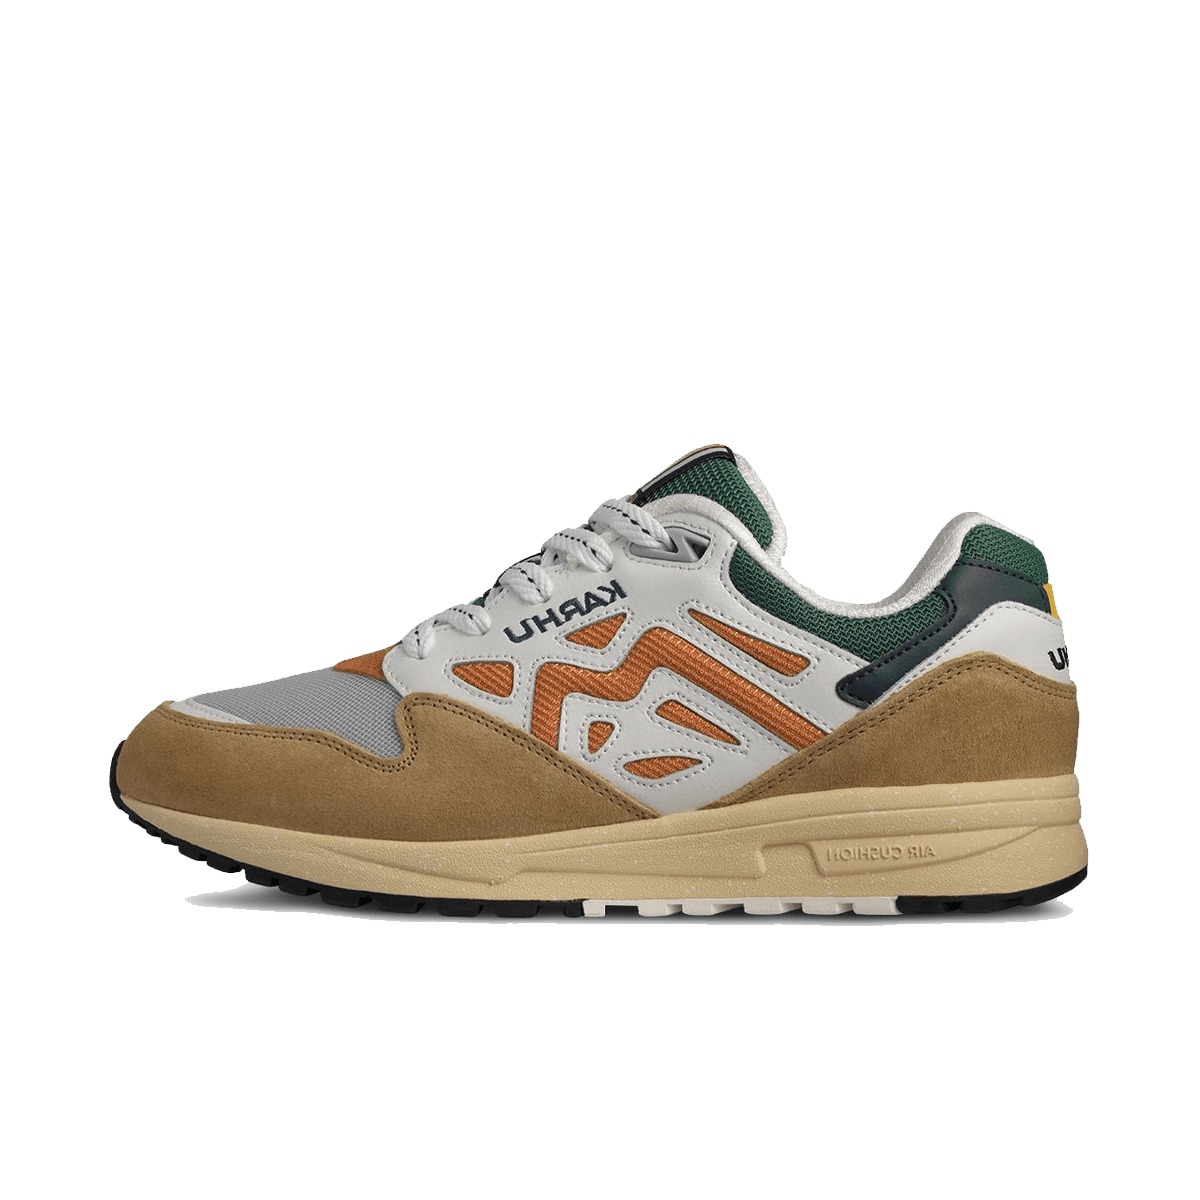 Karhu Legacy 96 'Curry' - The Forest Rules Pack F806049